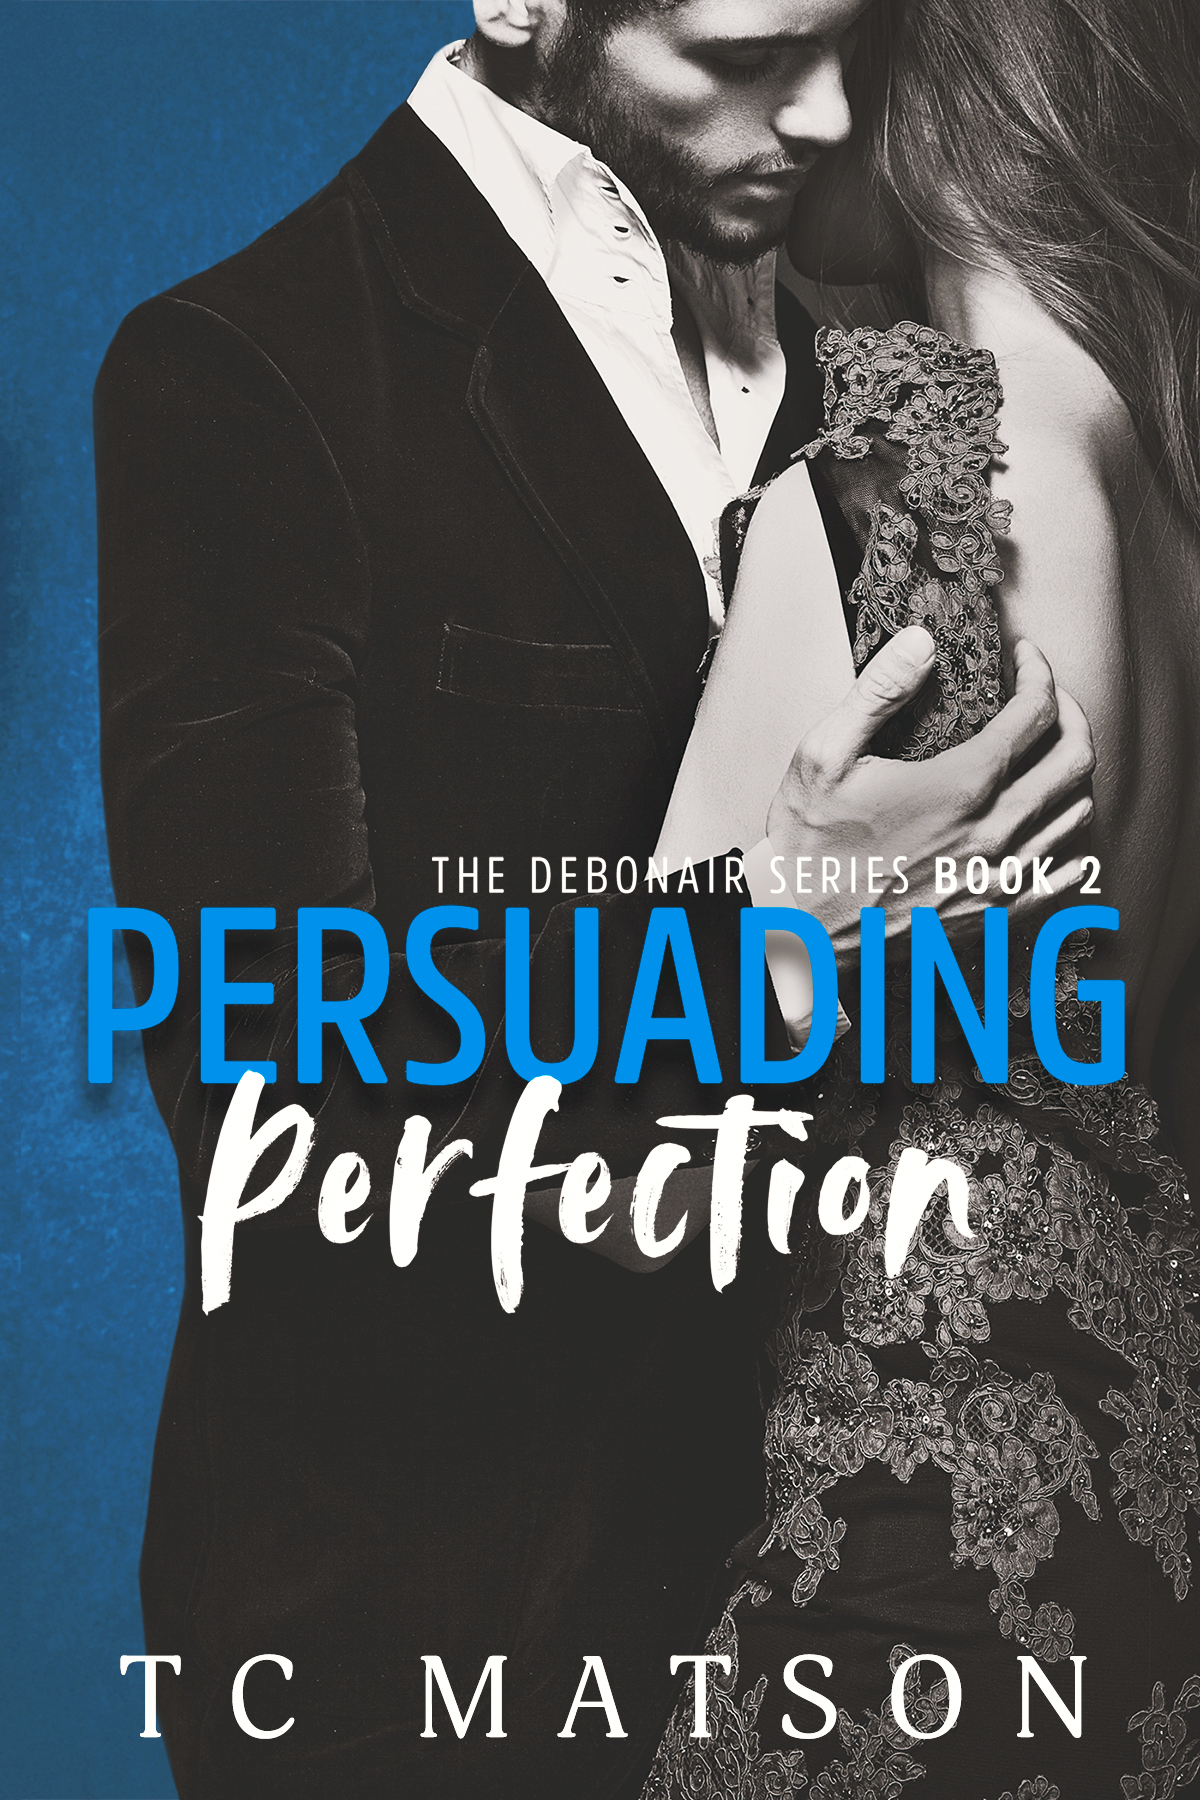 Persuading Perfection by T.C. Matson [Review]